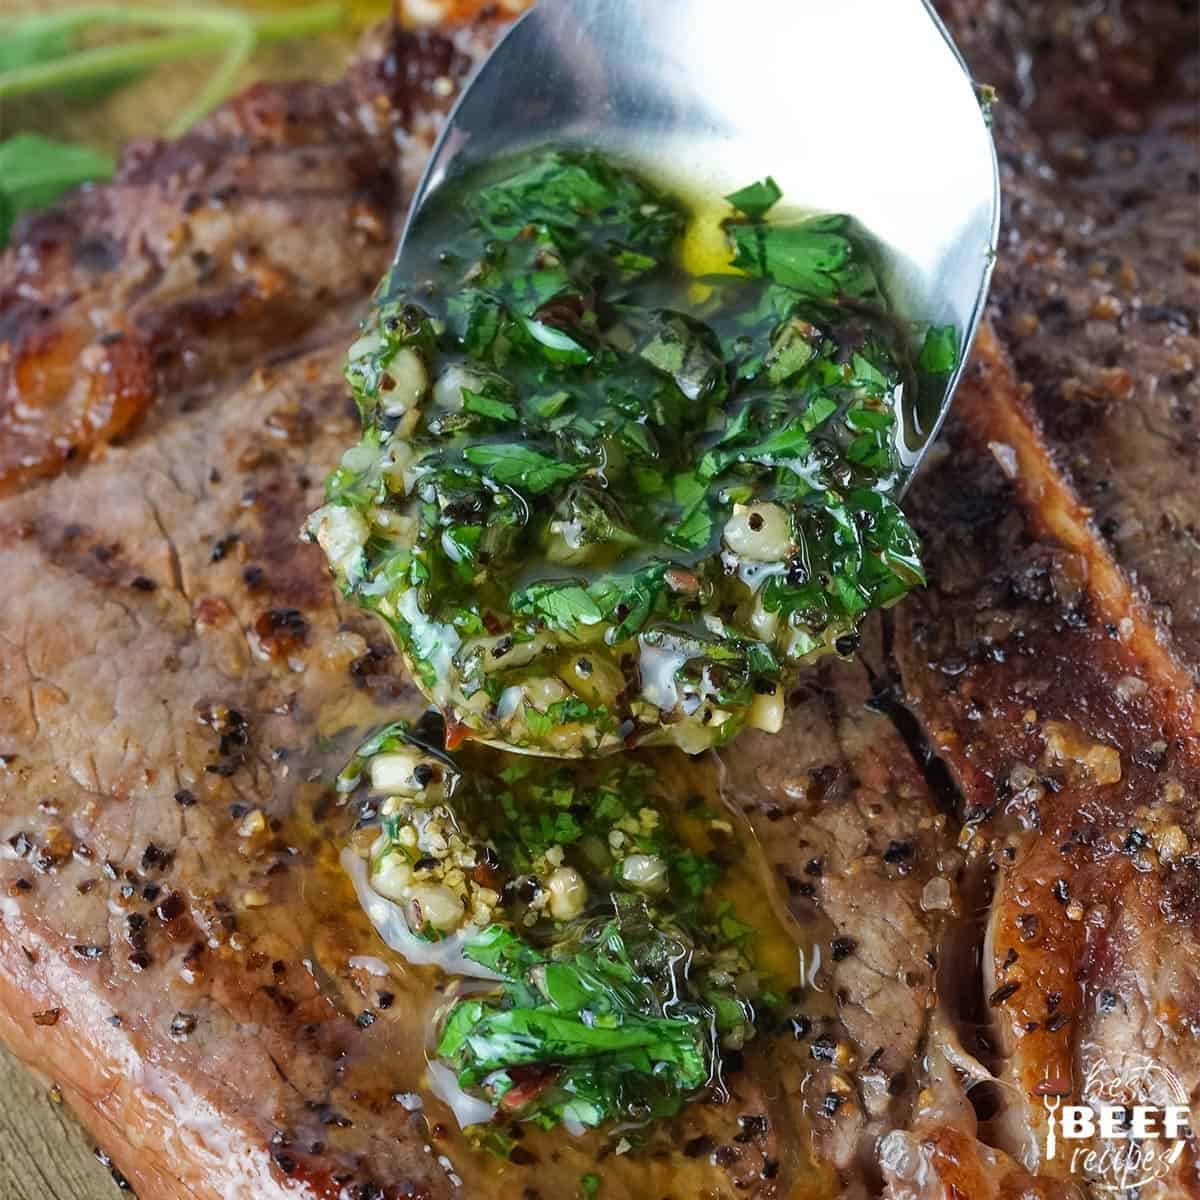 Pouring chimichurri sauce on to steak with a spoon